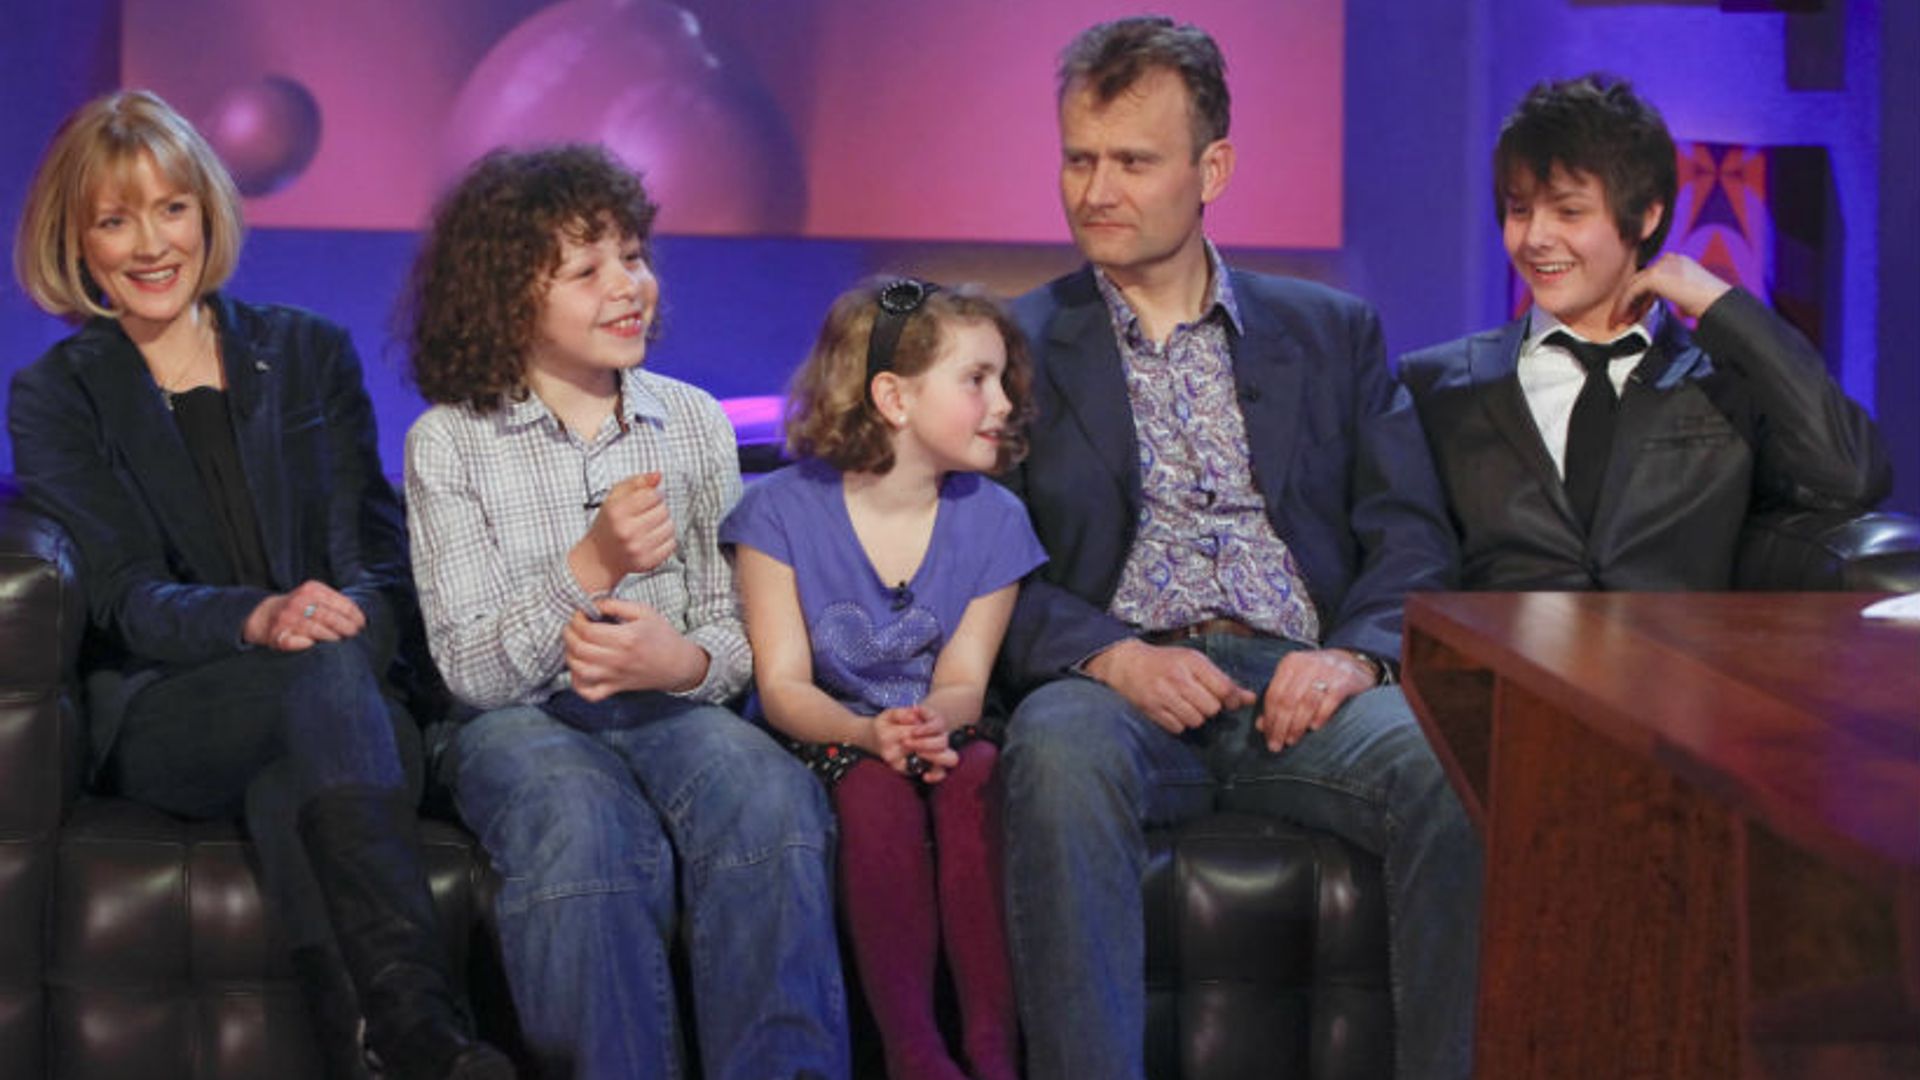 outnumbered hugh dennis claire skinner